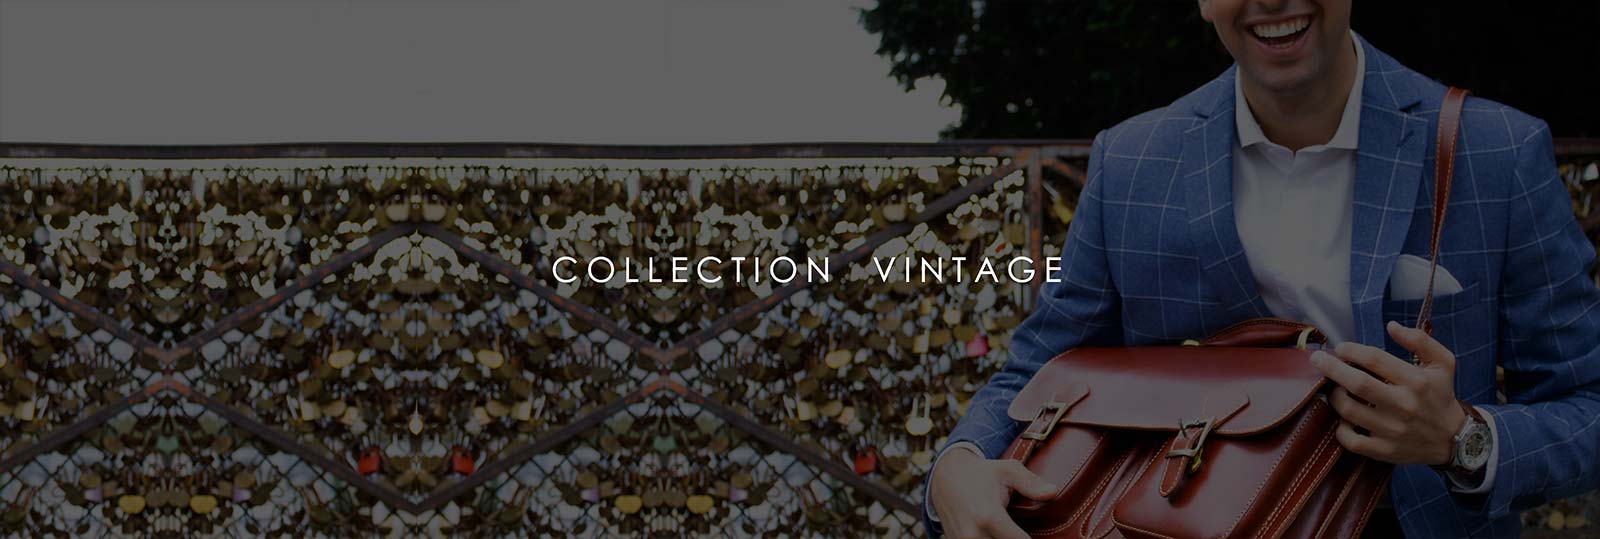 Collection Vintage homme